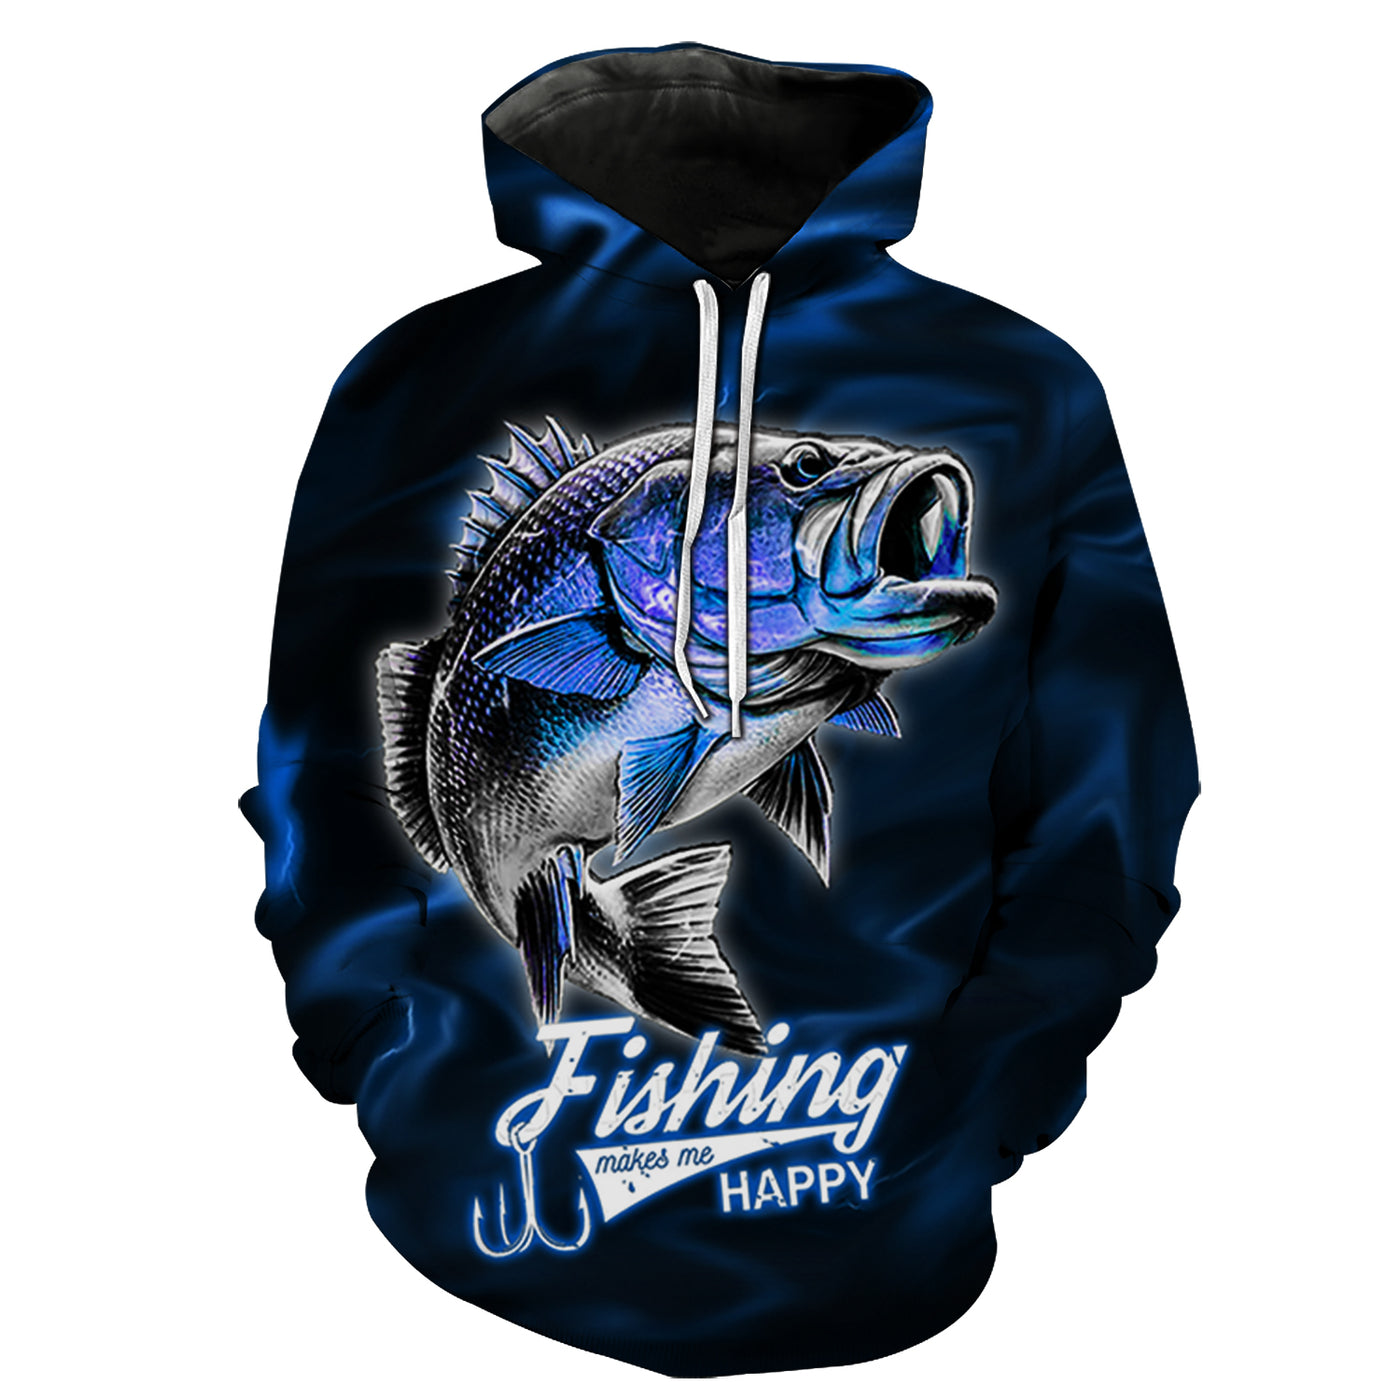 Personalized Go Fishing Pullover Hoodie, Custom Fishing Lover Hoodie,  Fishing Sweatshirt, Fishing Lover Shirt, Fisherman Sweatshirt 